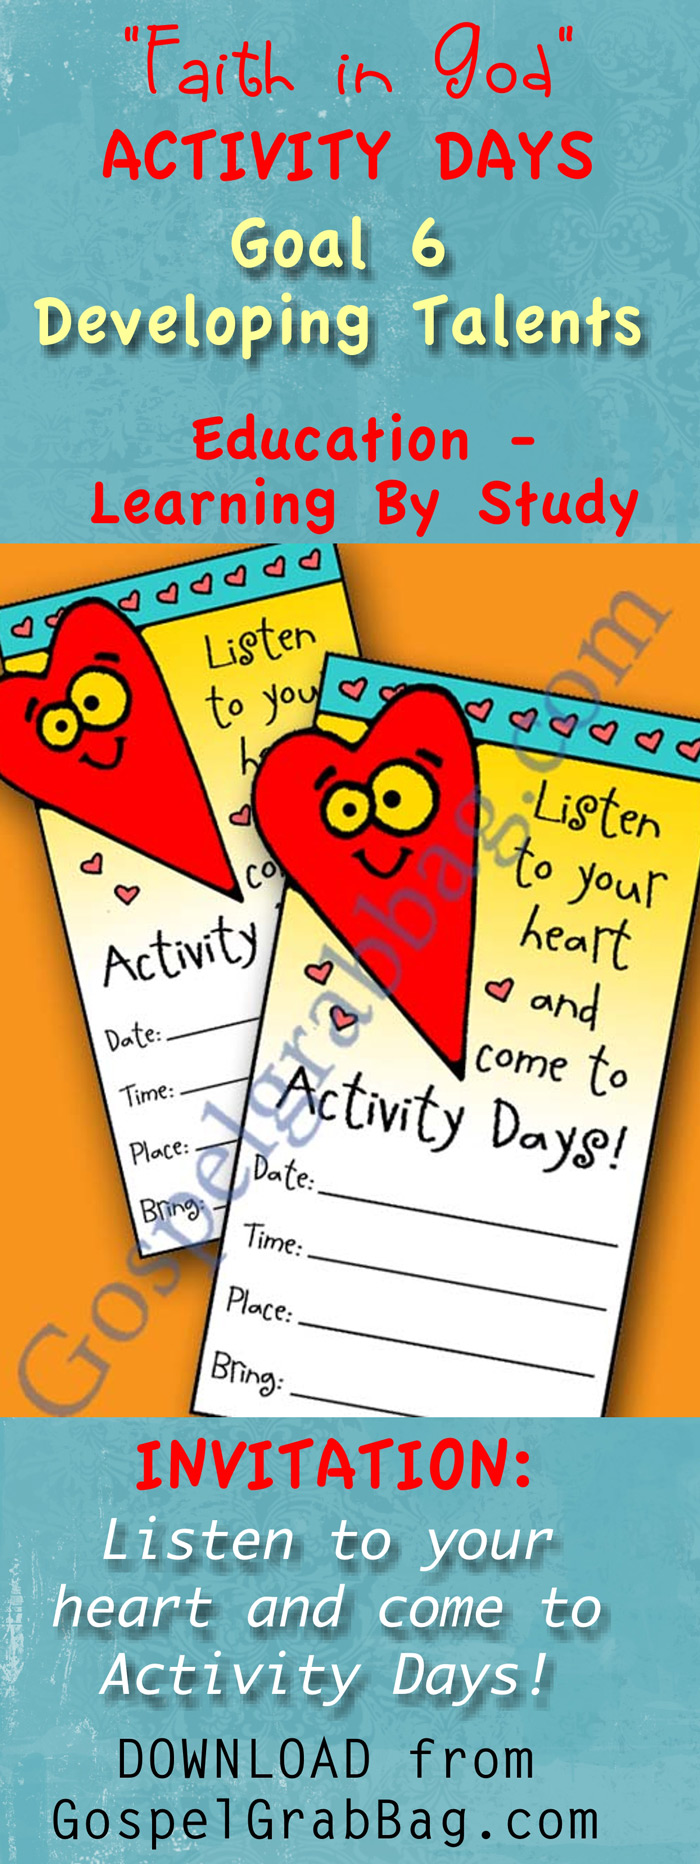 invitation-for-activity-days-activity-download-activity-to-achieve